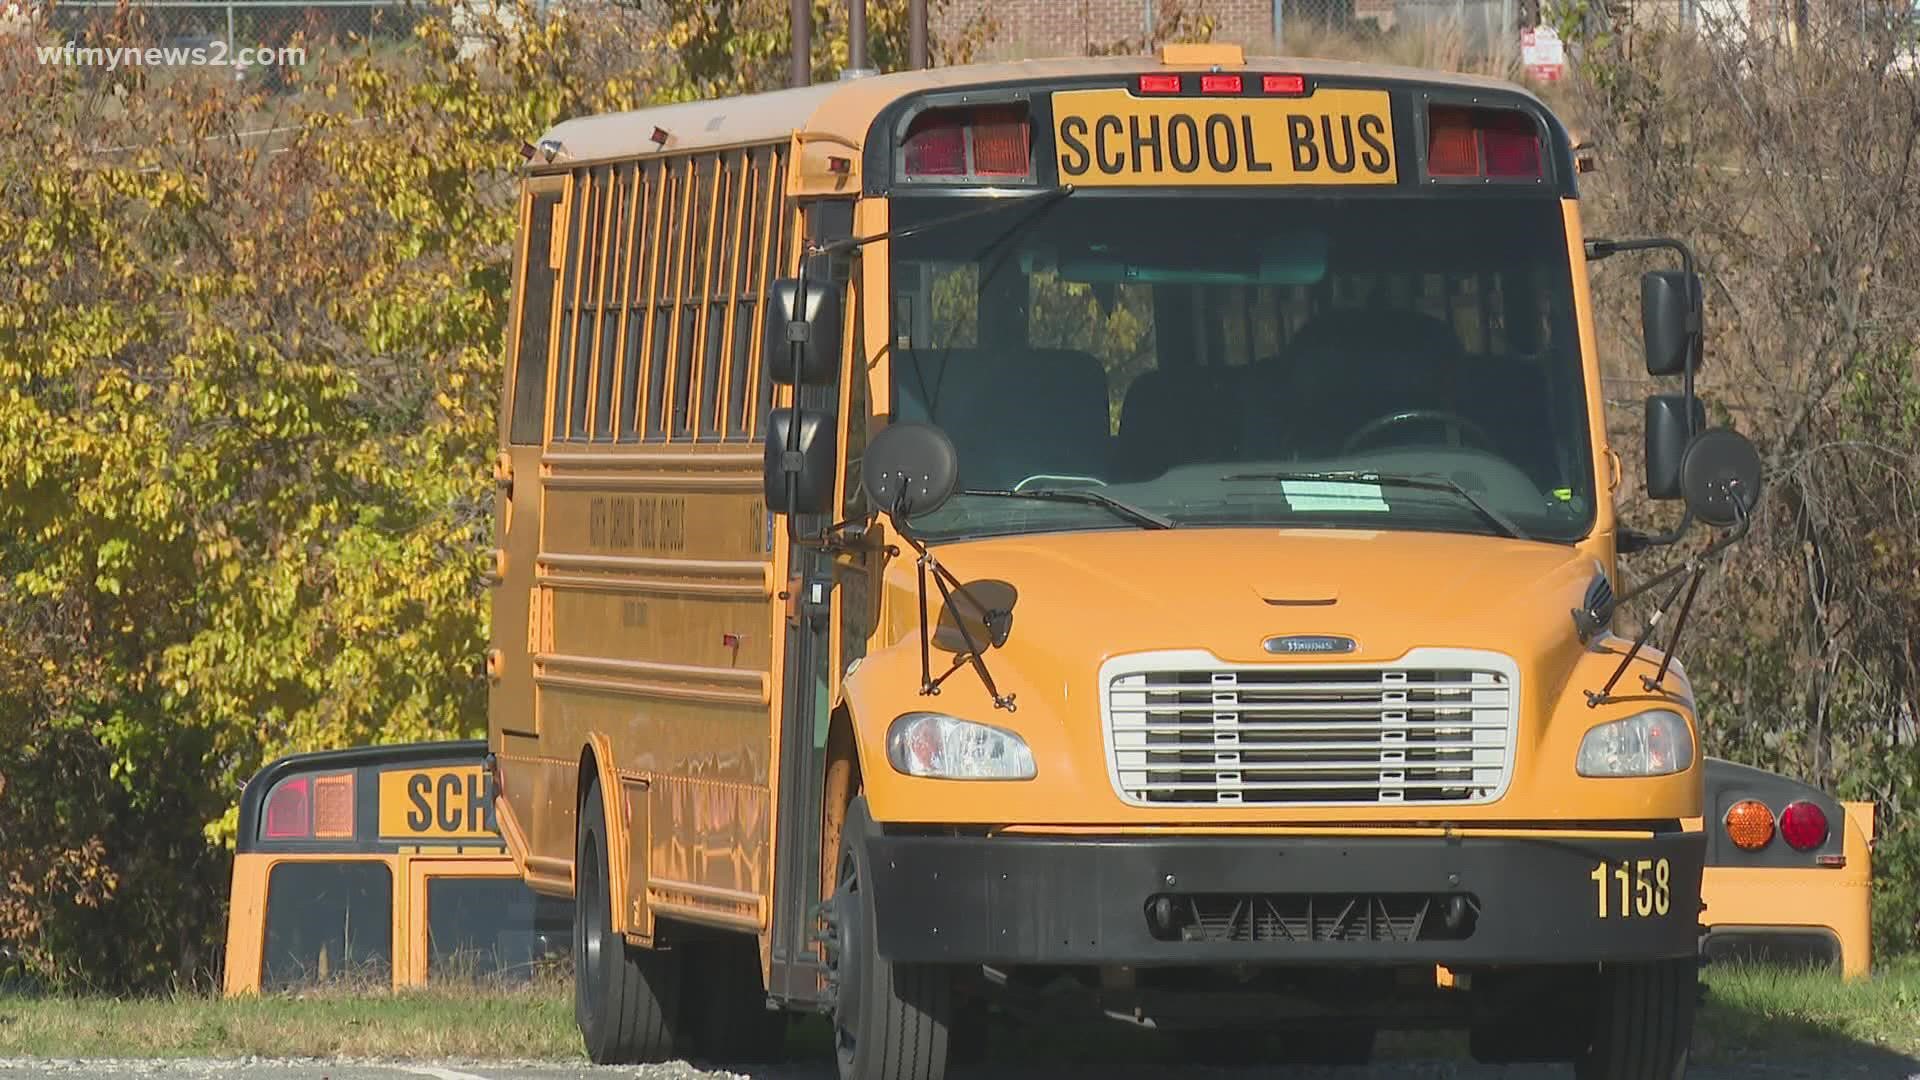 The transportation department has received 50,000 calls in the first three months of school this year.